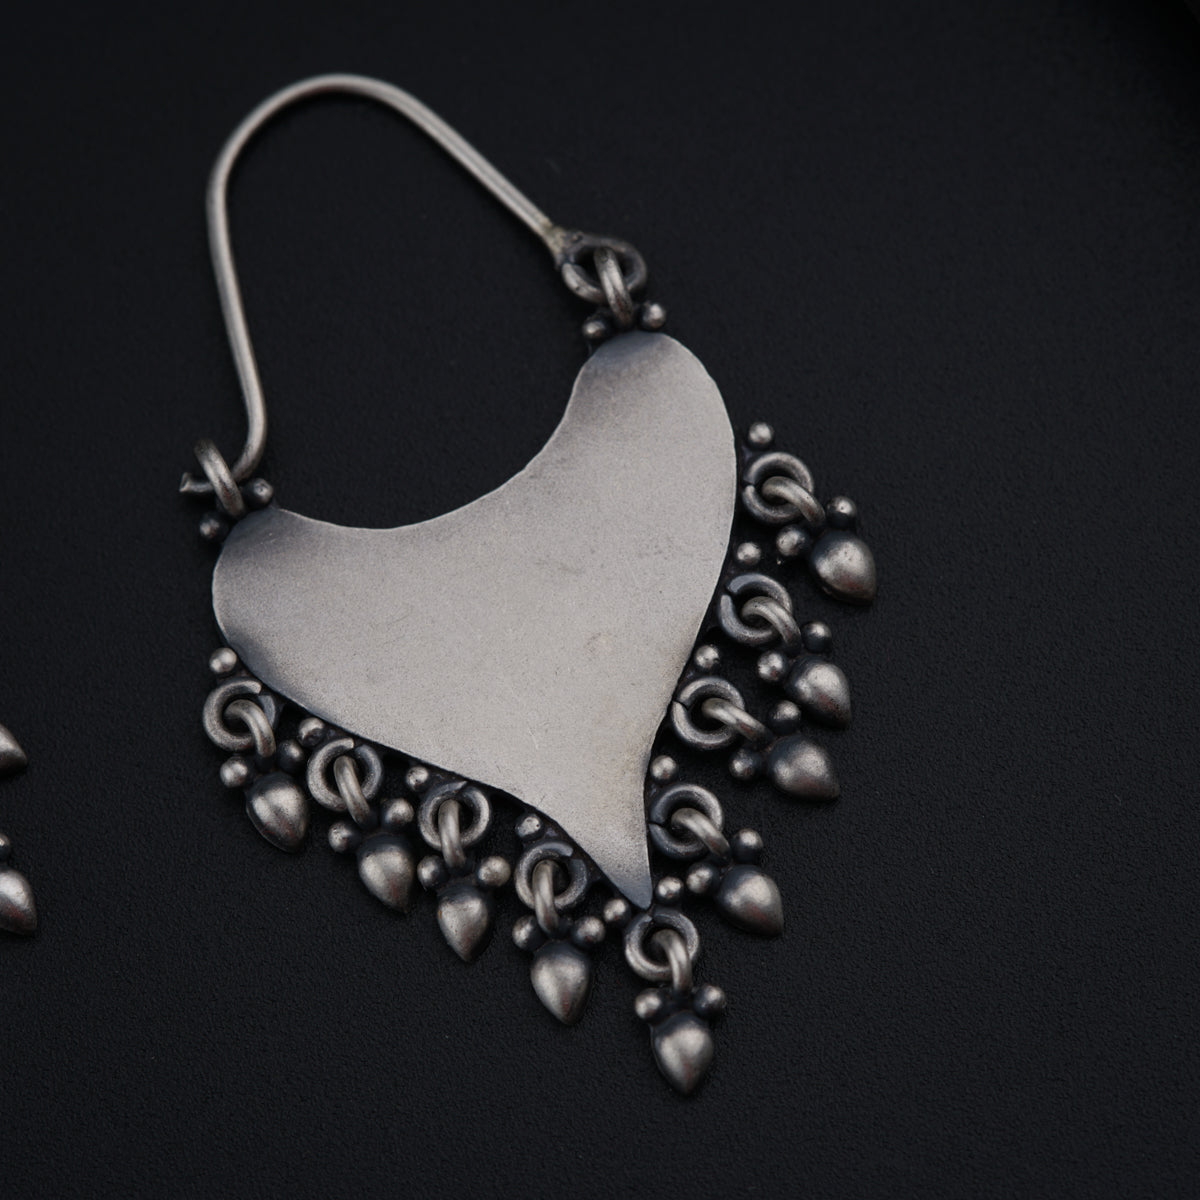 a close up of a pair of earrings on a table